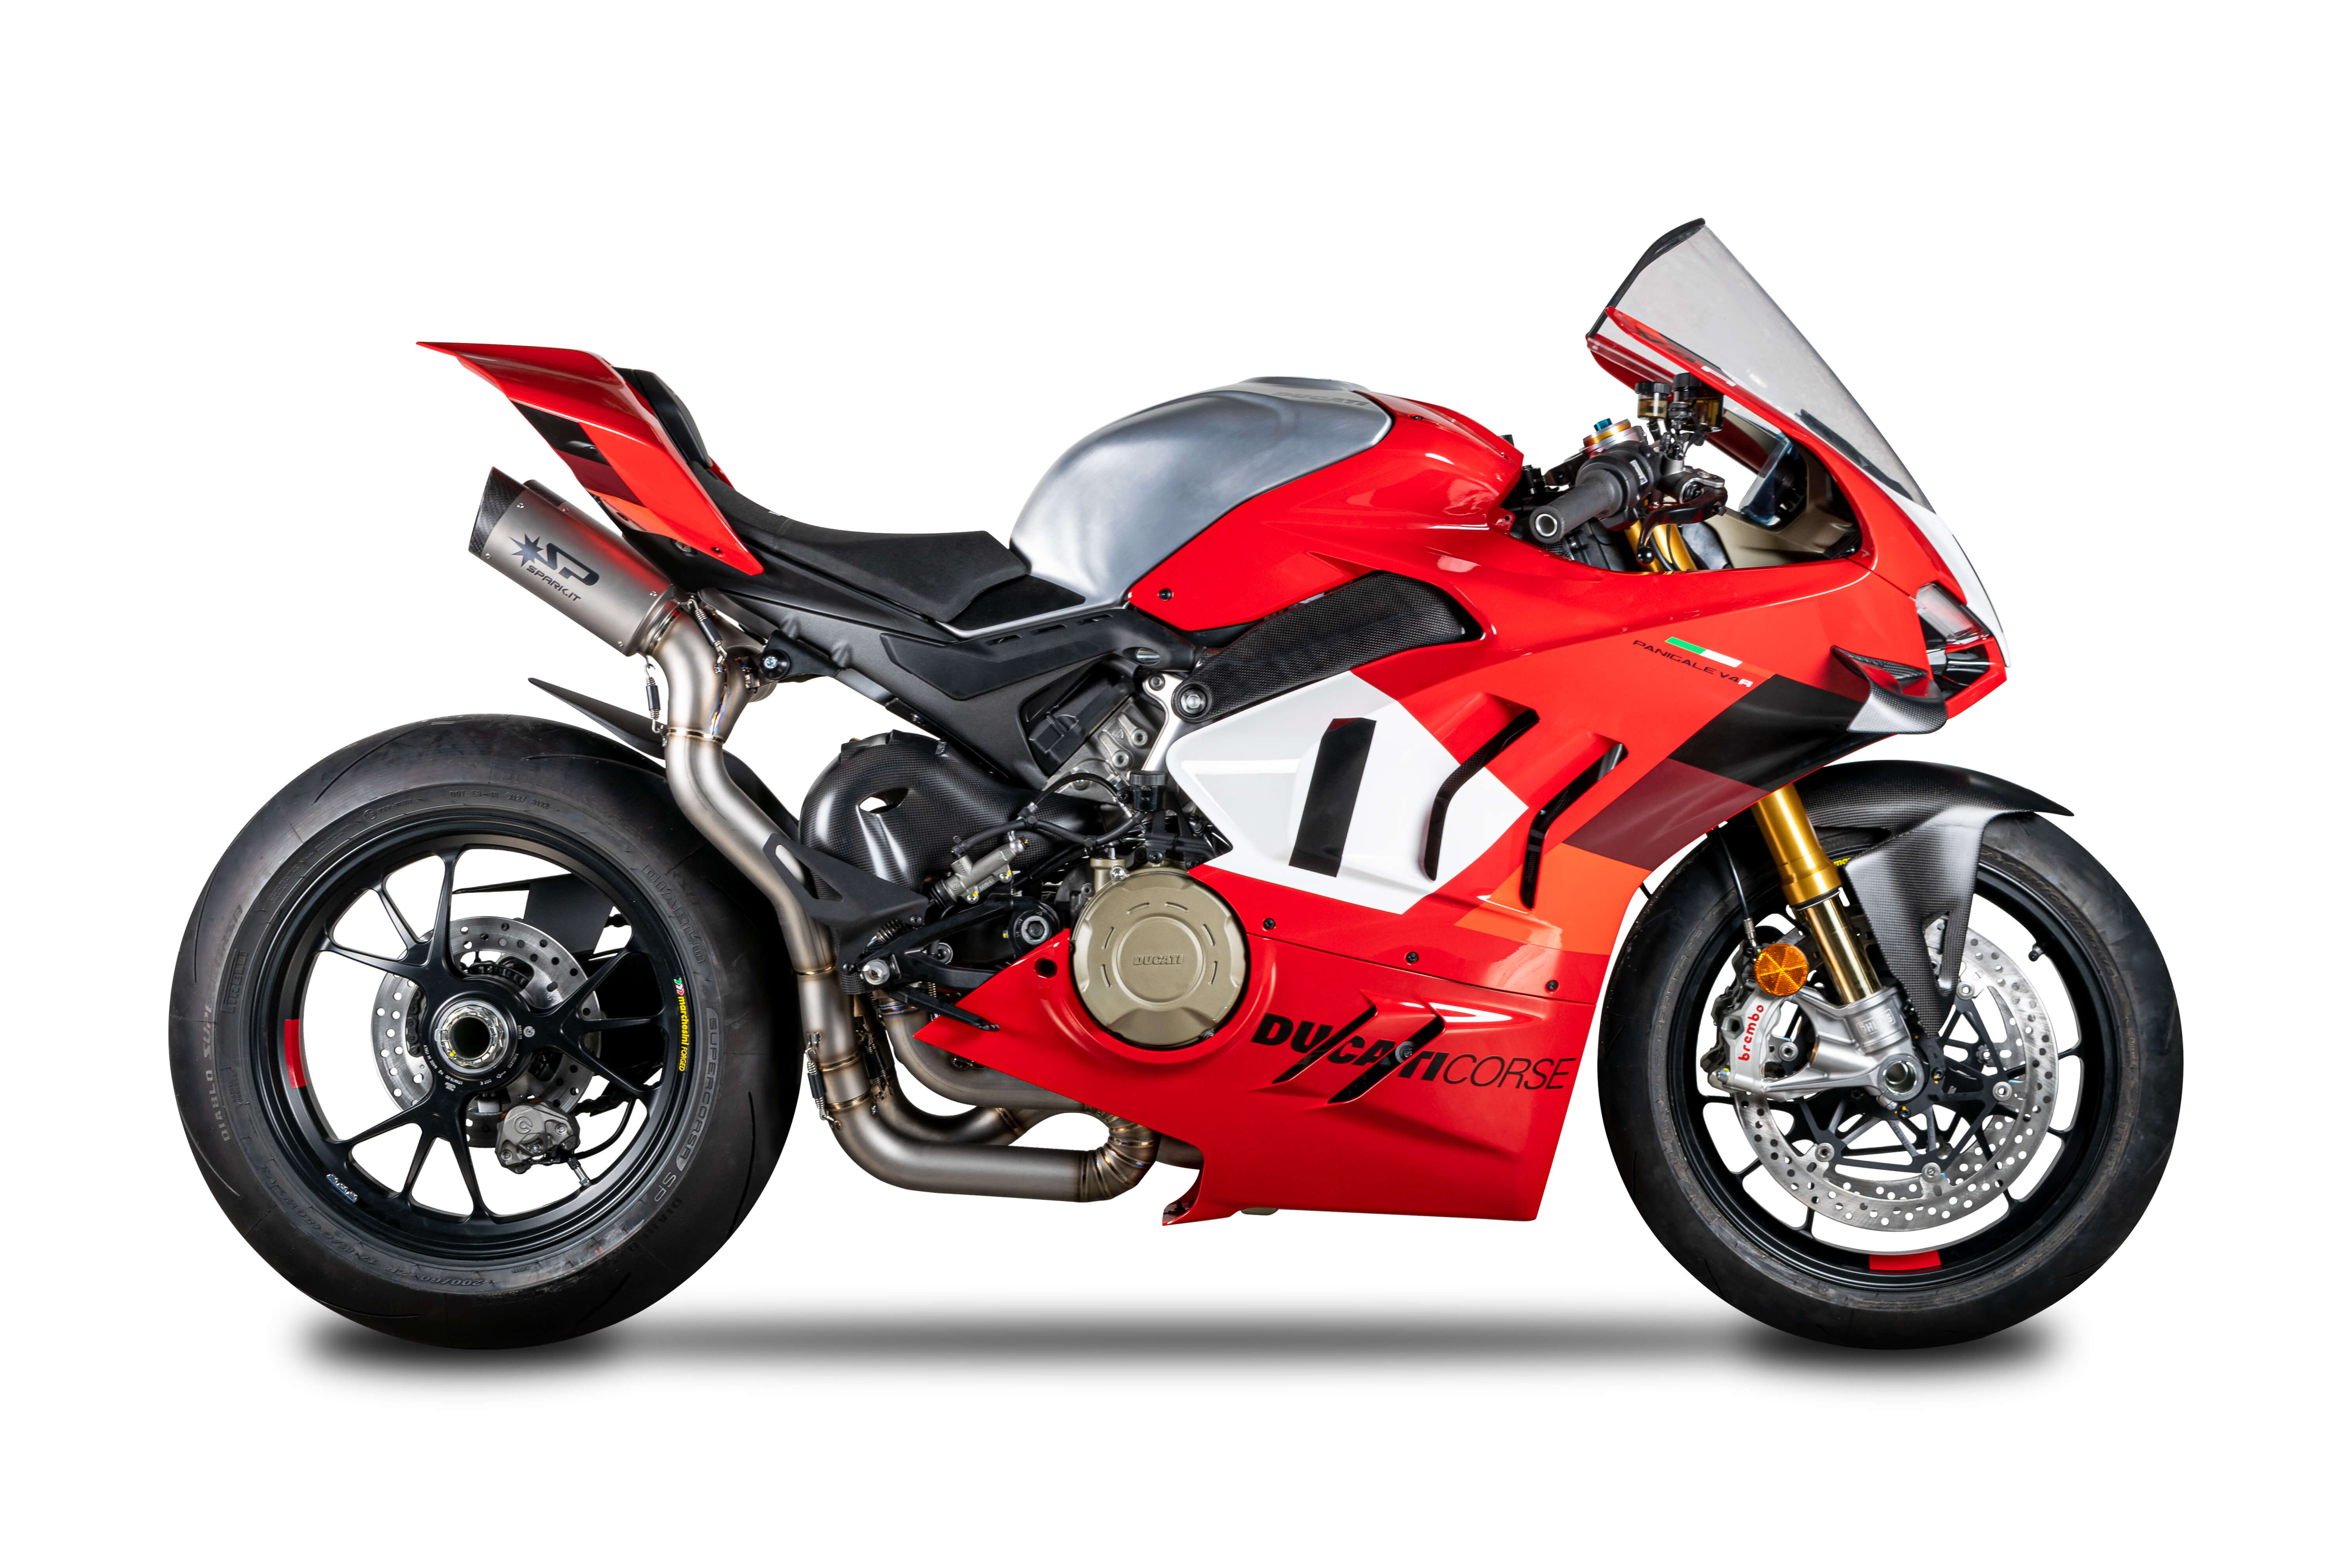 Ducati Previews 214-hp Panigale V4 S and Speciale Track Weapons